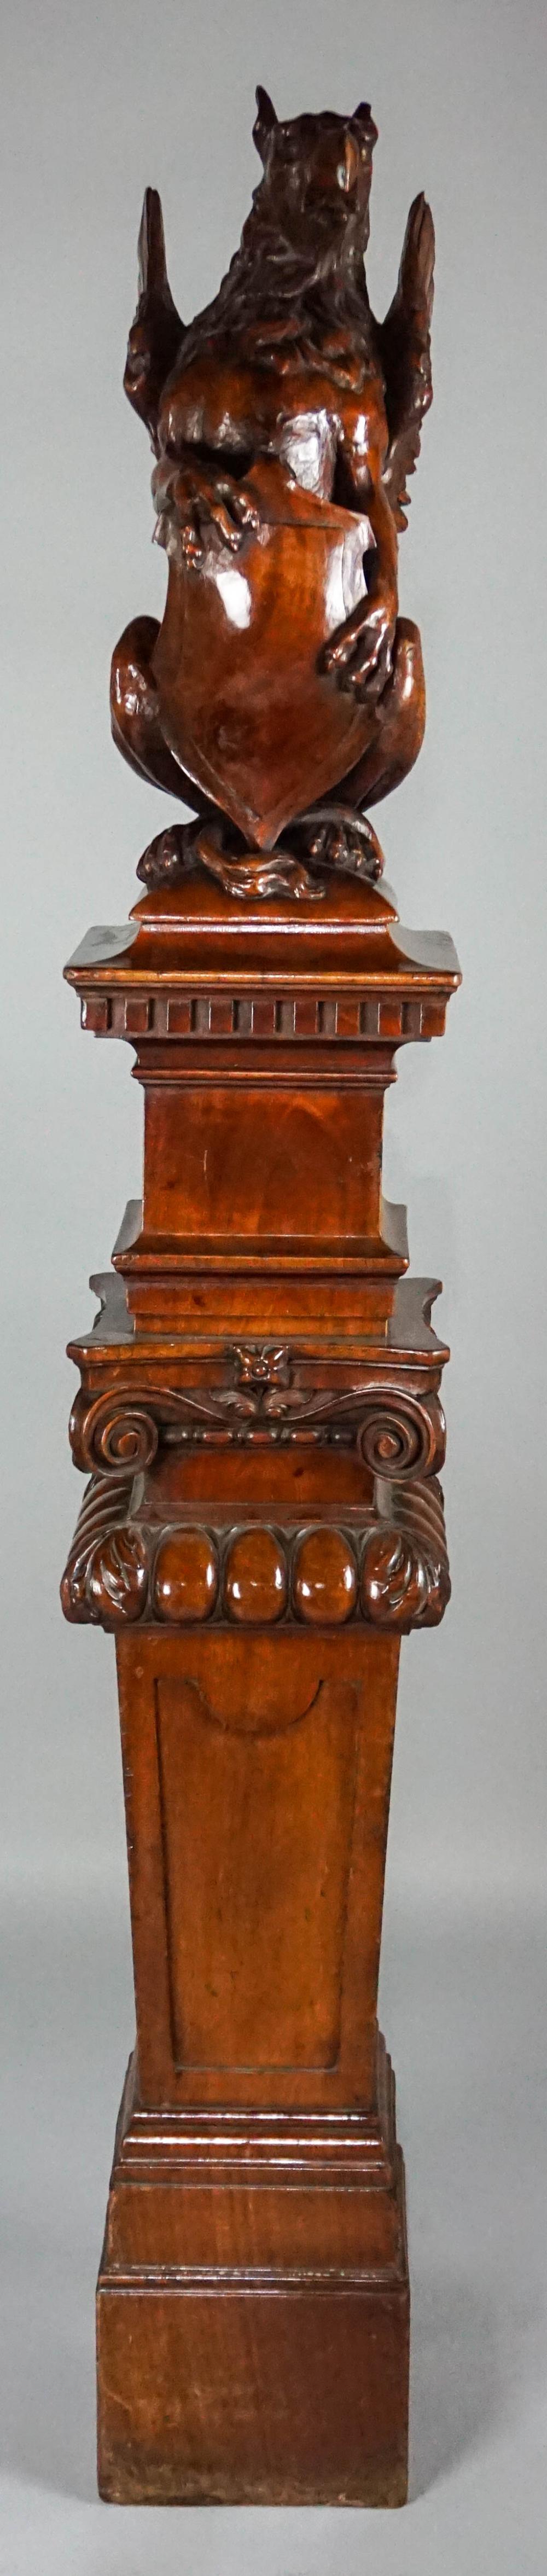 MAHOGANY NEWEL POST WITH CARVED